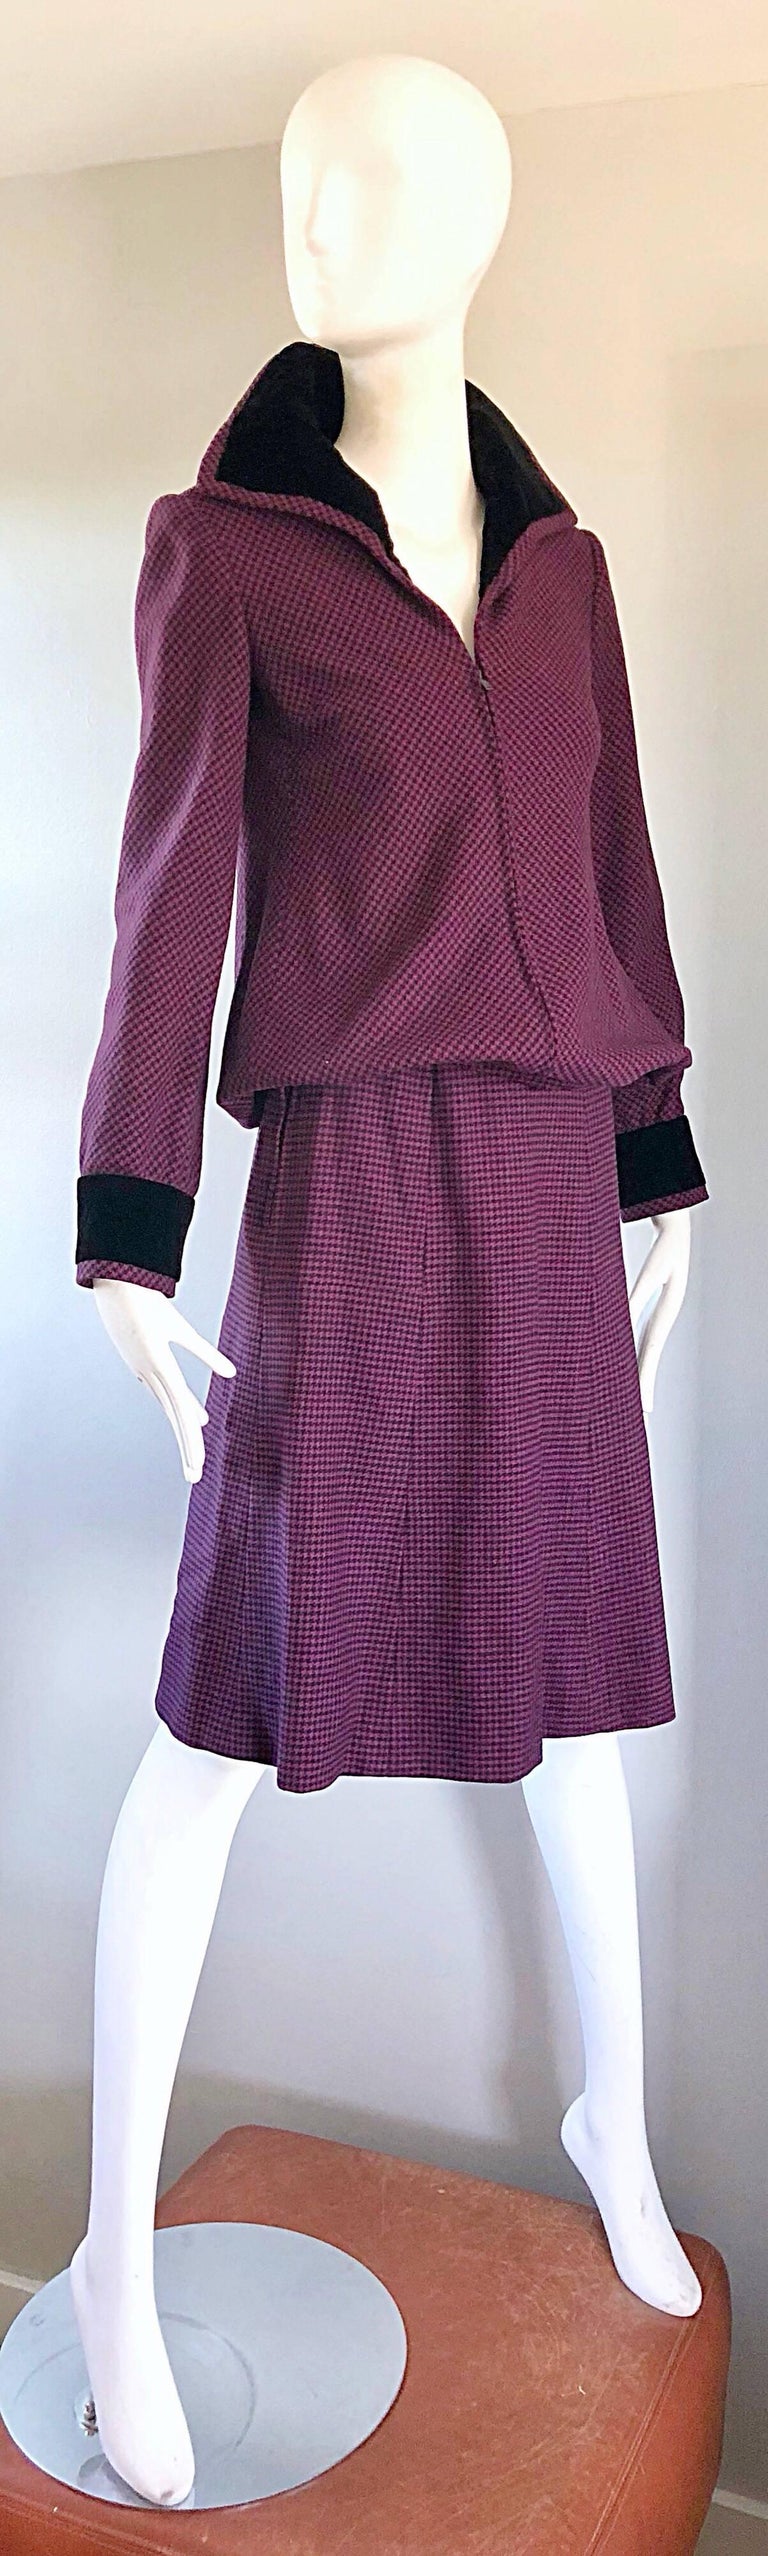 Cardinali 1970s Original Sample Purple + Black Checkered Vintage 70s Skirt Suit  In Excellent Condition For Sale In San Diego, CA